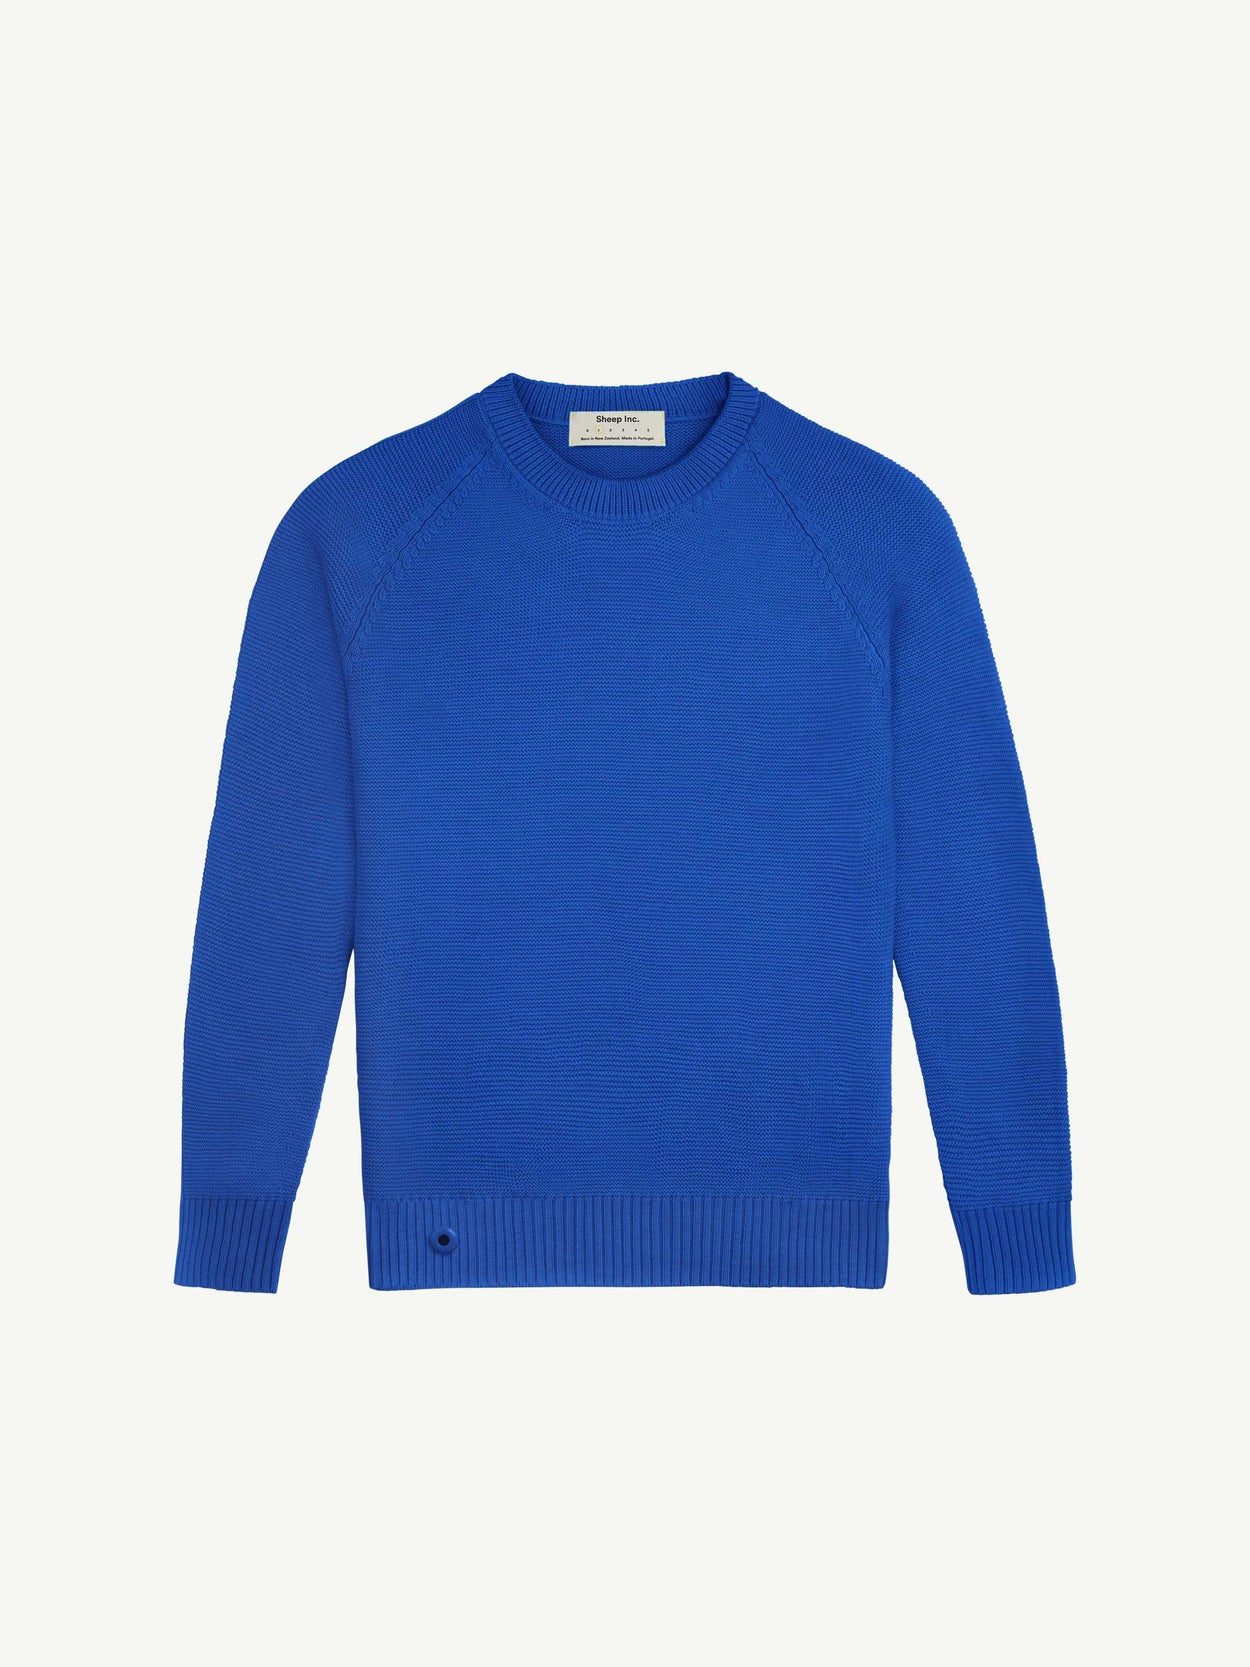 Hand Knitted Wool Sweater Soft Pullover ROYAL BLUE Crewneck 